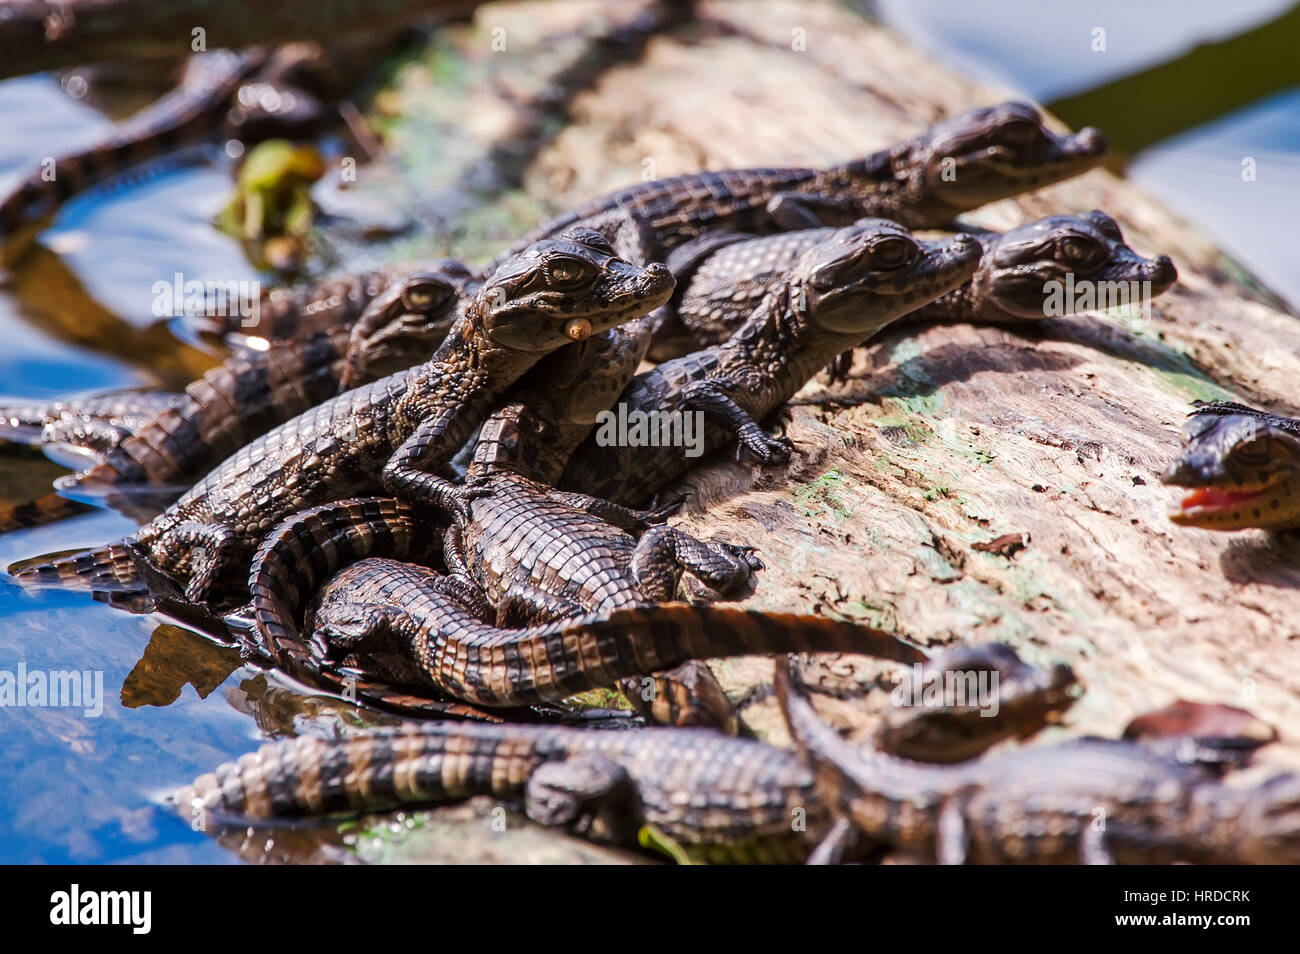 Baby Broad-snouted caiman (Caiman latirostris), photographed in Espírito Santo, Brazil. Atlântic forest biome. Stock Photo